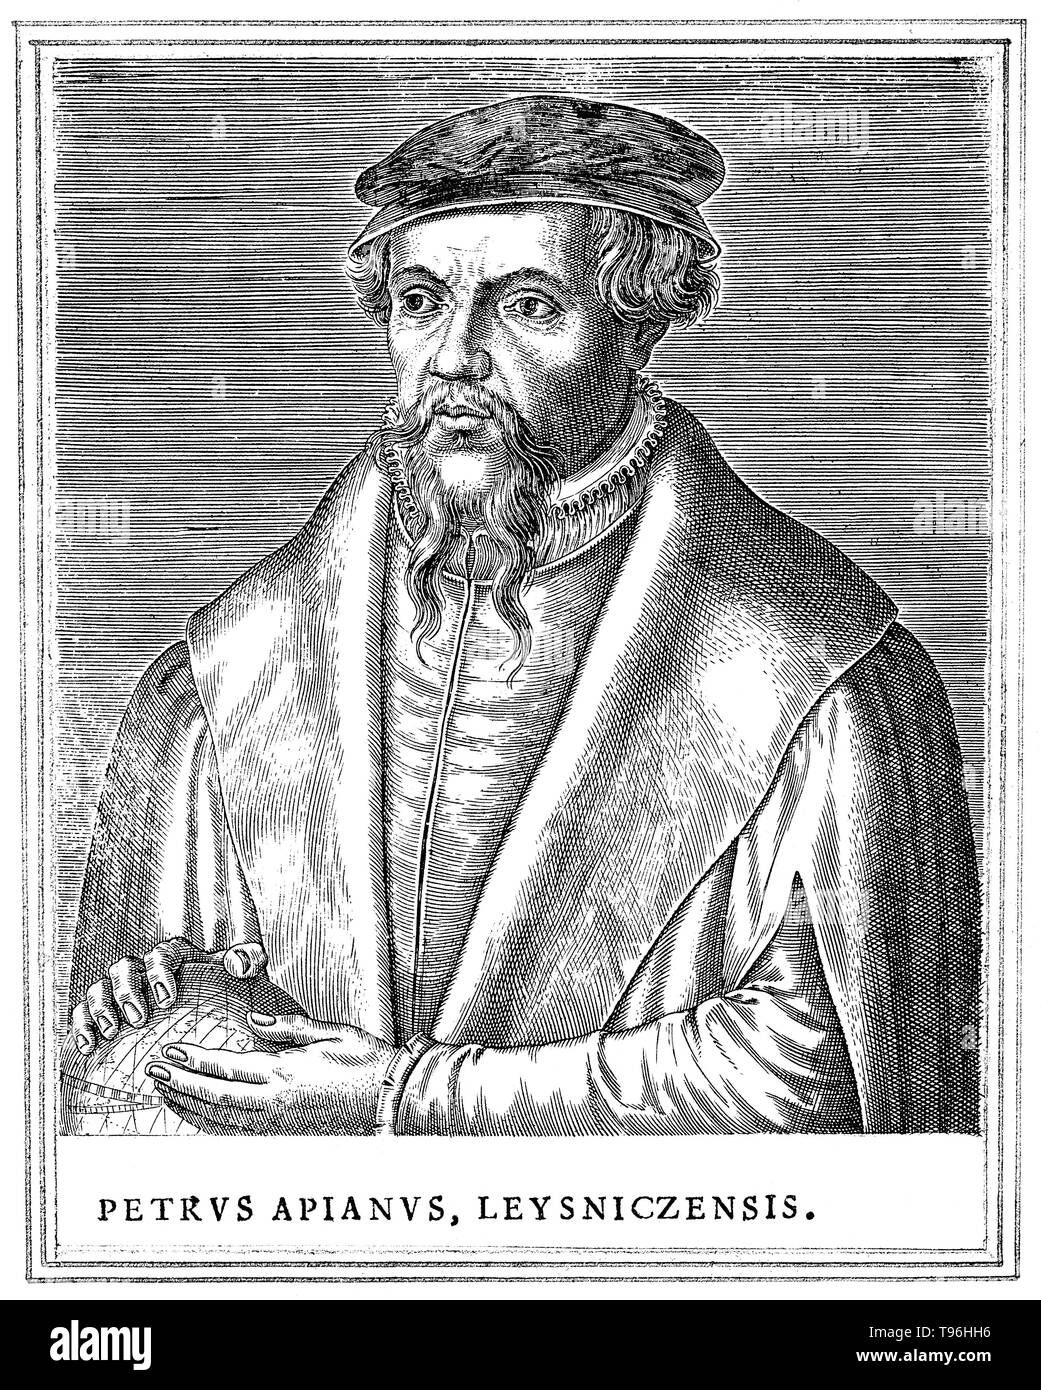 Petrus Apianus (April 16, 1495 - April 21, 1552) was a German humanist, known for his works in mathematics, astronomy and cartography. In 1524 he produced his Cosmographicus liber, a respected work on astronomy and navigation that was to see at least 30 reprints in 14 languages. In 1527 he published a variation of Pascal's triangle, and in 1534 a table of sines. In 1531, he observed a comet and discovered that a comet's tail always point away from the sun. Stock Photo